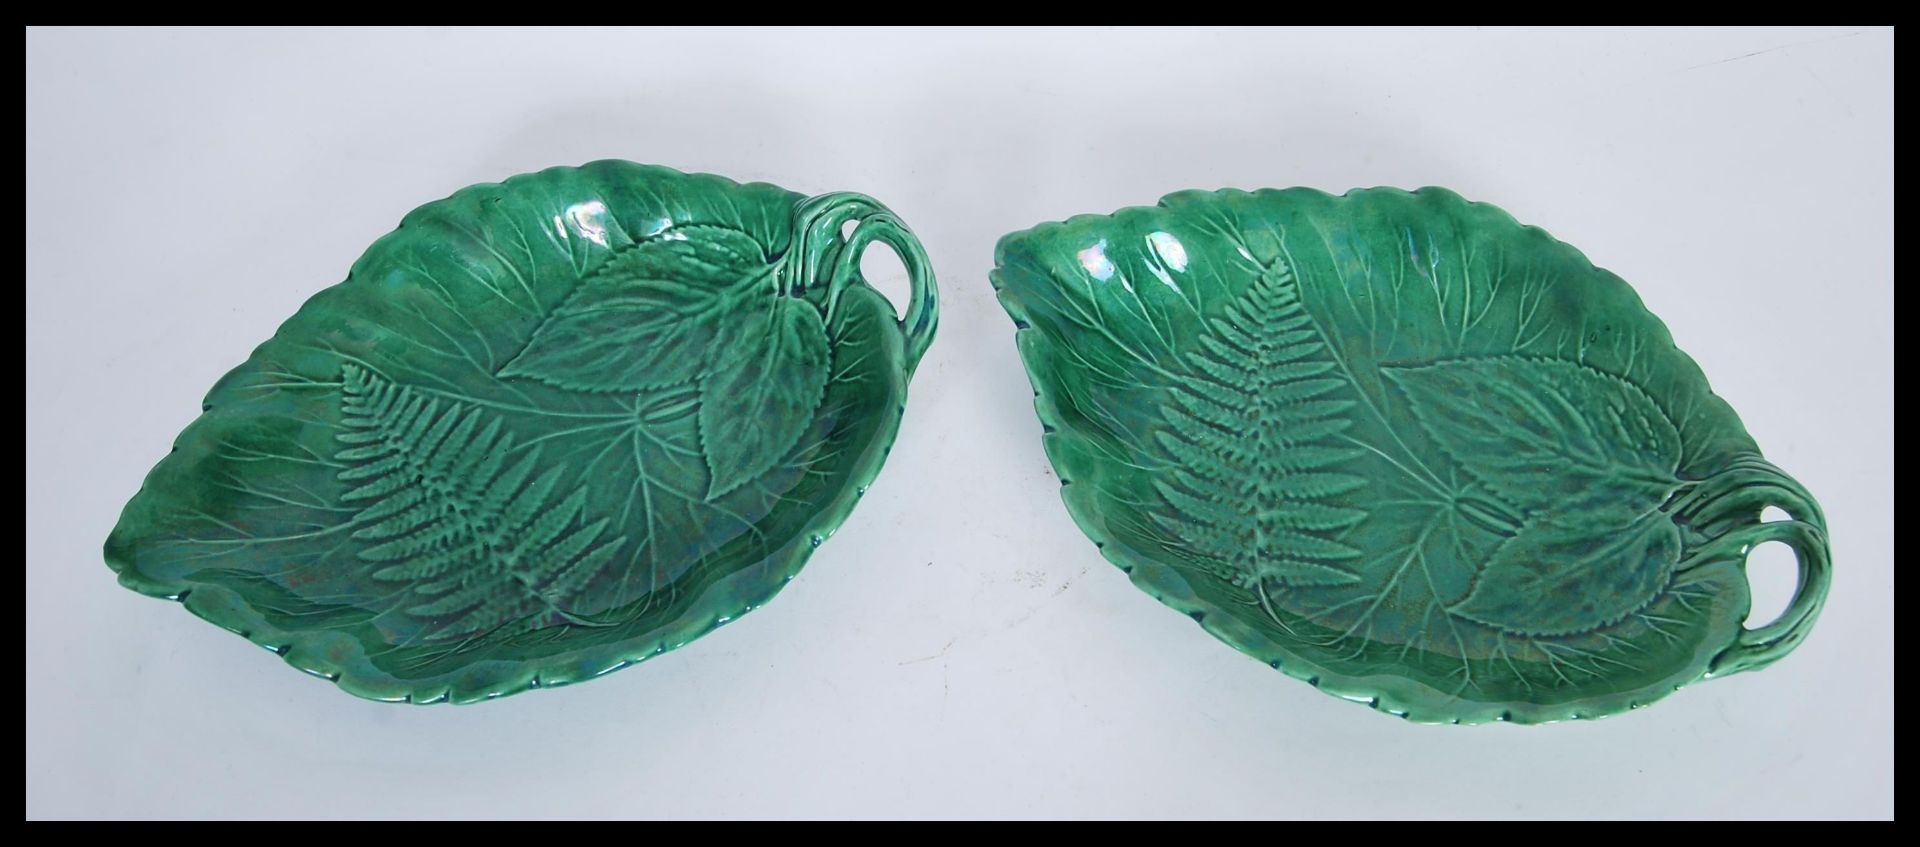 A pair of 19th Century Minton Majolica serving plates in the form of two leaves having raised